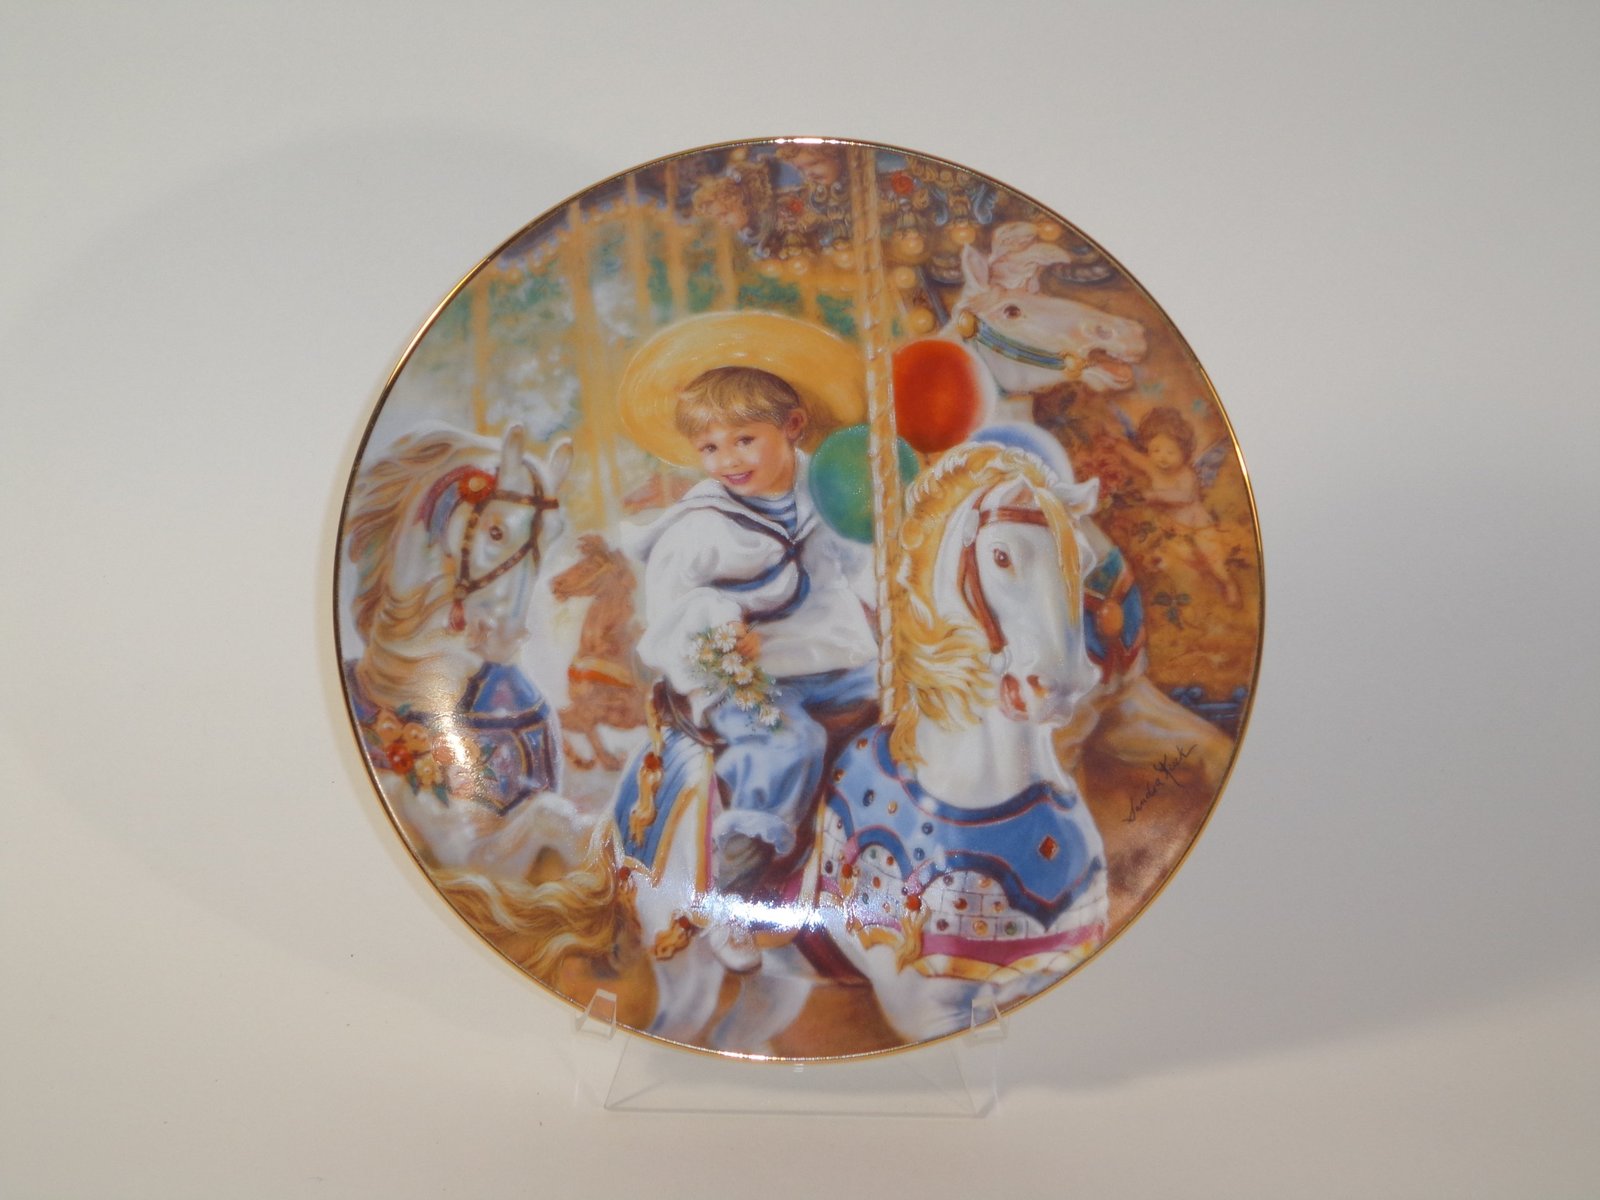 Carousel of Dreams Collector Plate by Sandra Kuck 4th Issue of The Hearts and Fl - $34.53